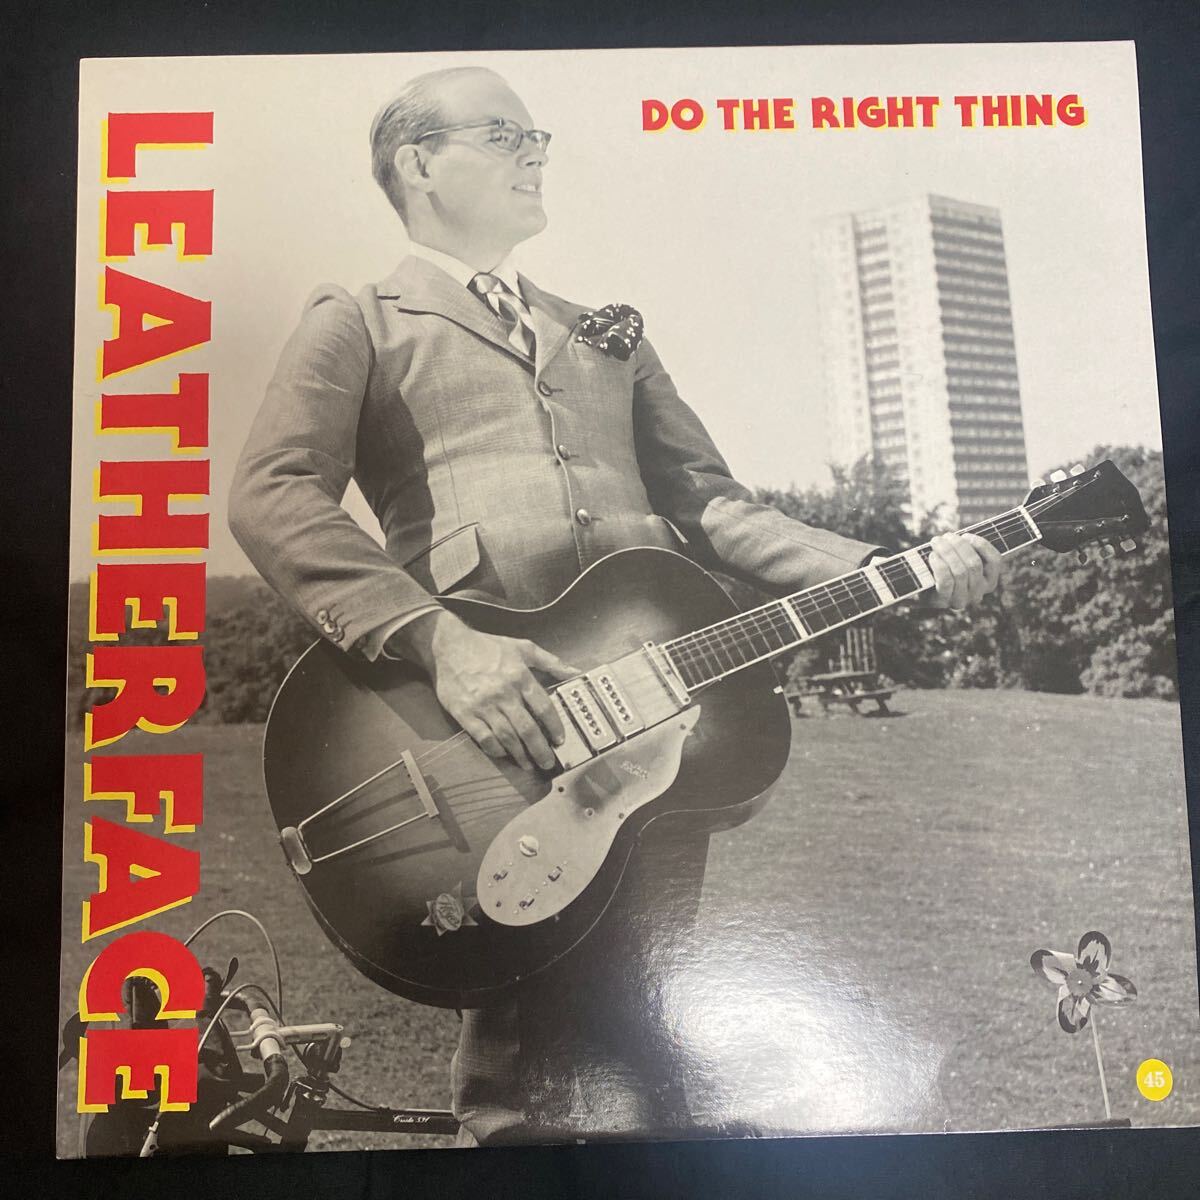 LEATHERFACE 「Do The Right Thing」 HYPE22T 1993年 UK盤 レコード LP_画像1